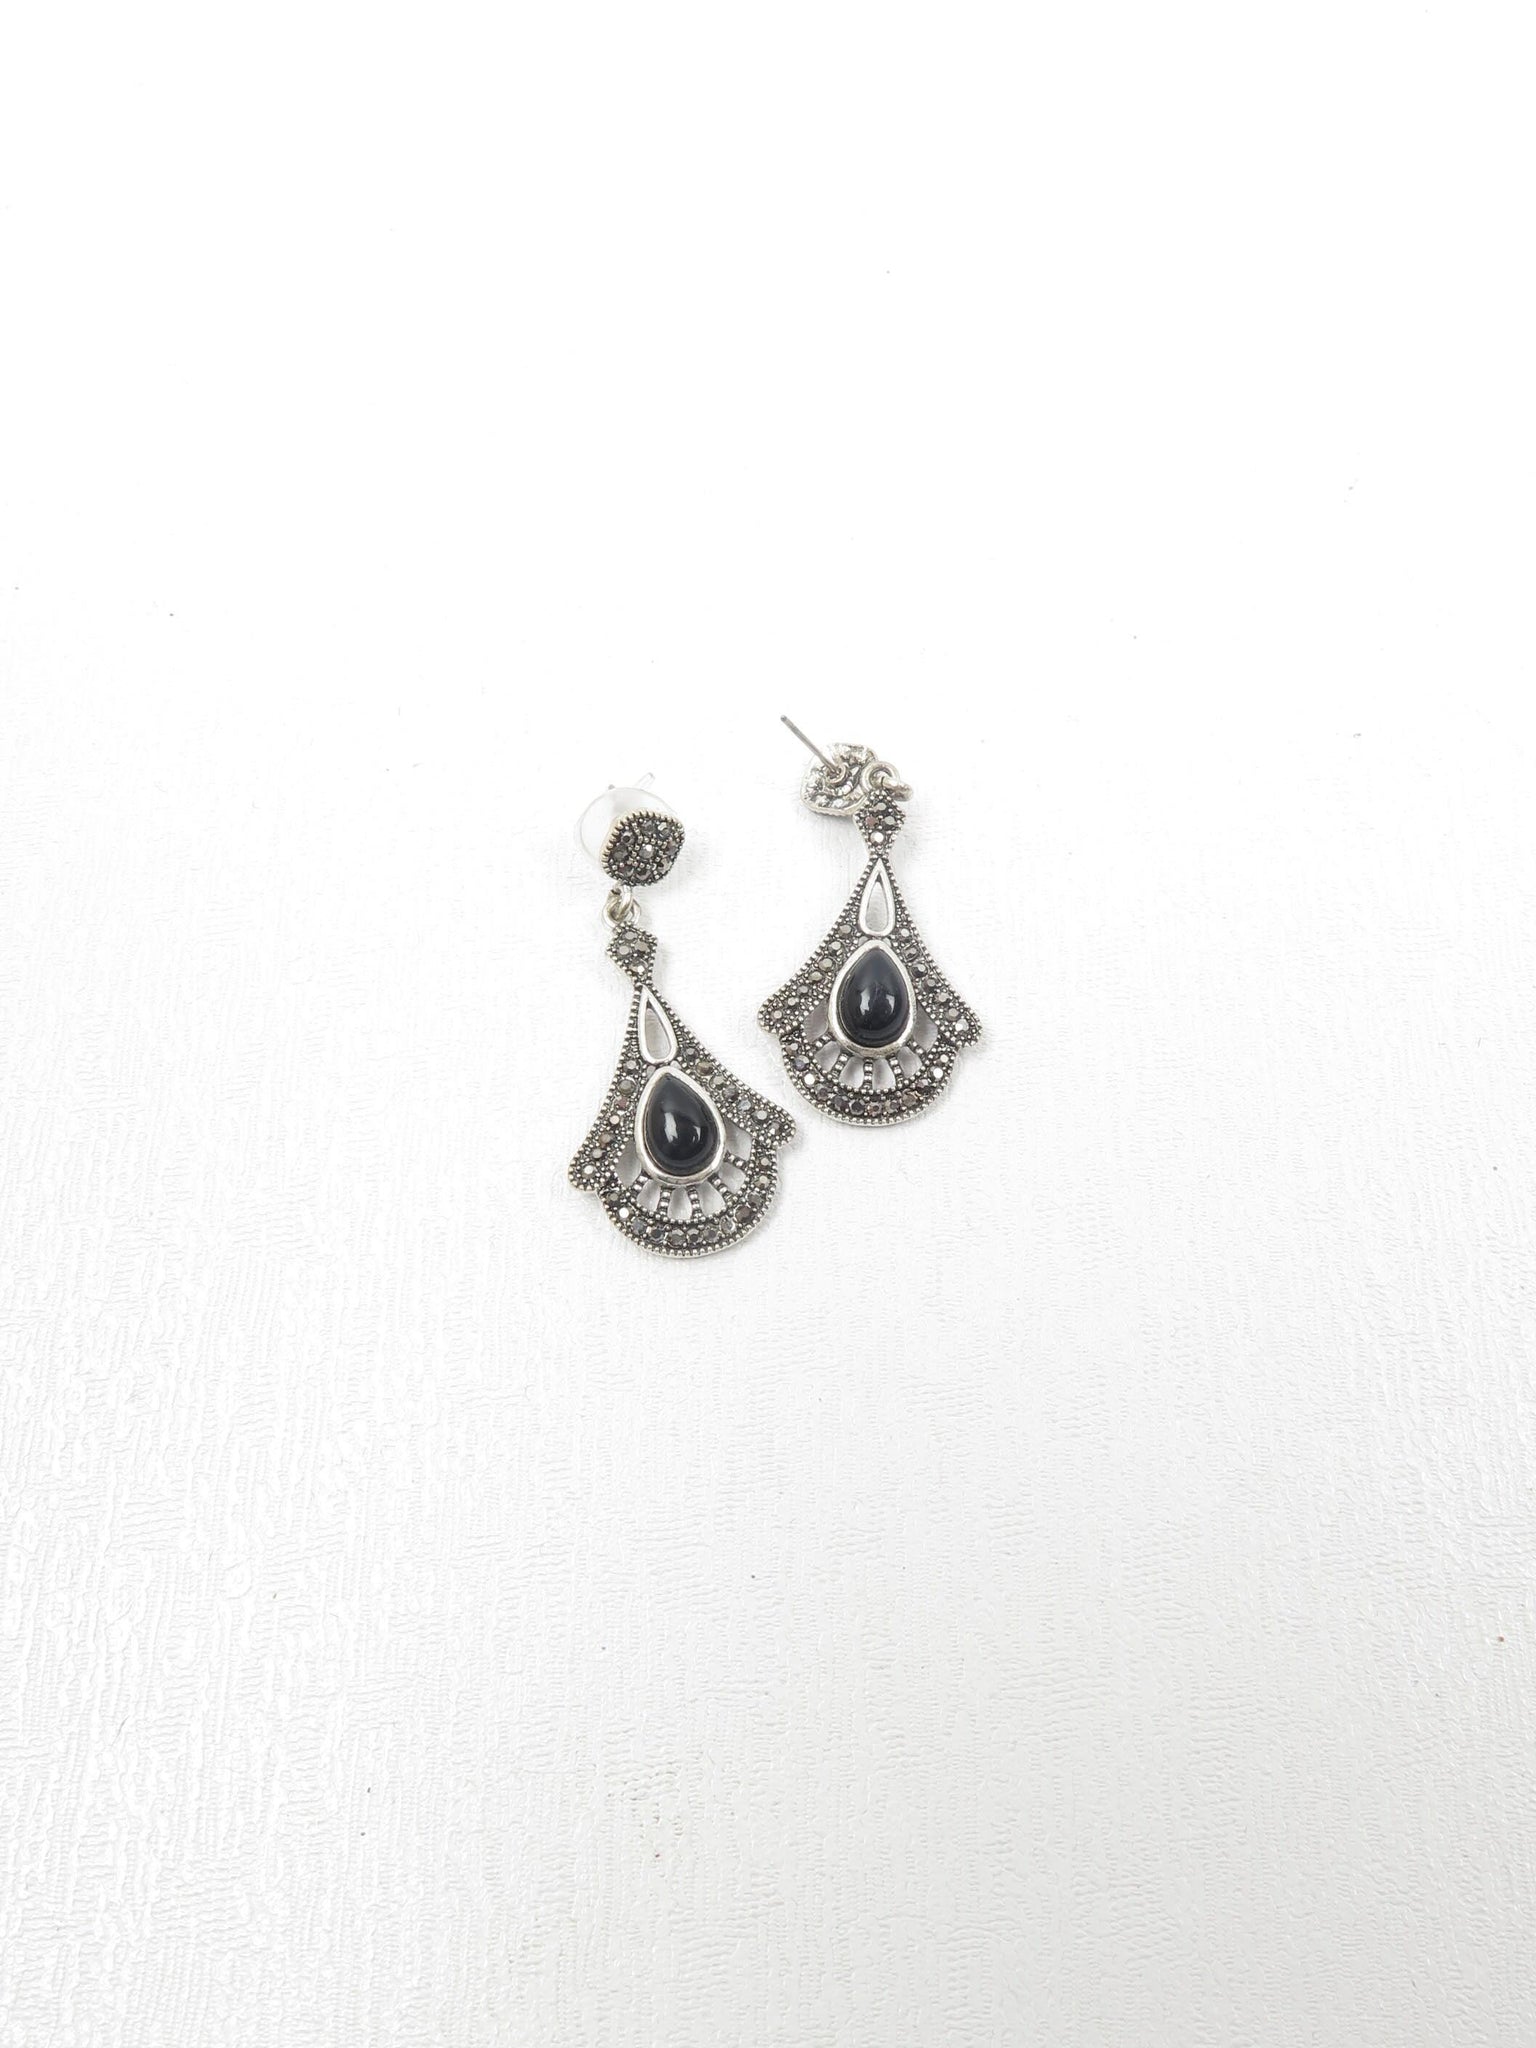 1920's Style Marcasite Drop Earrings New - The Harlequin